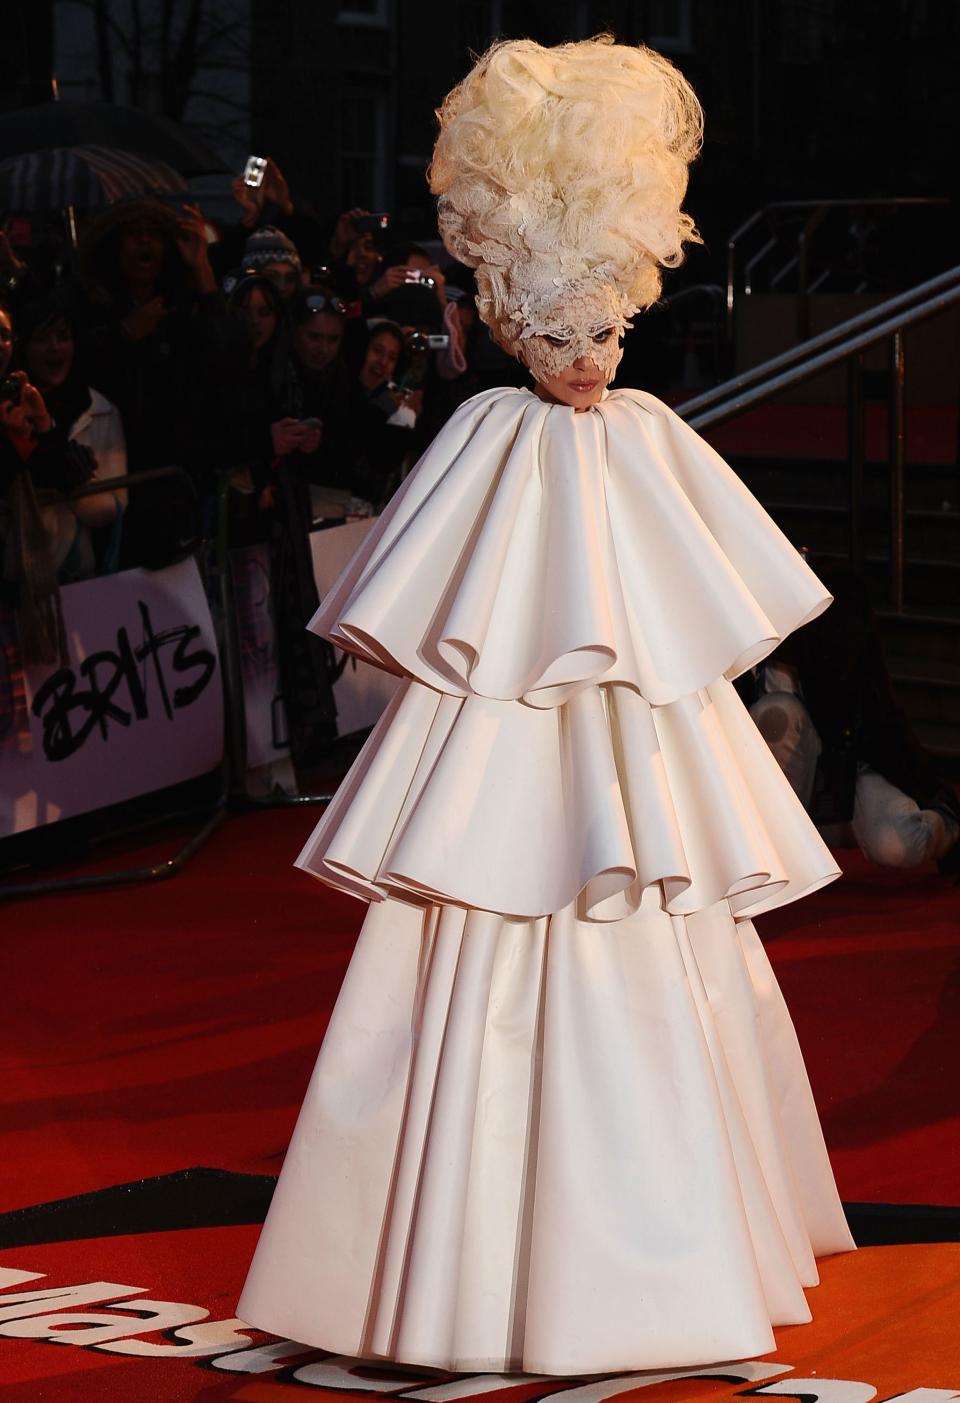 19 of Lady Gaga’s Campiest Outfits That Were Made for the Met Gala